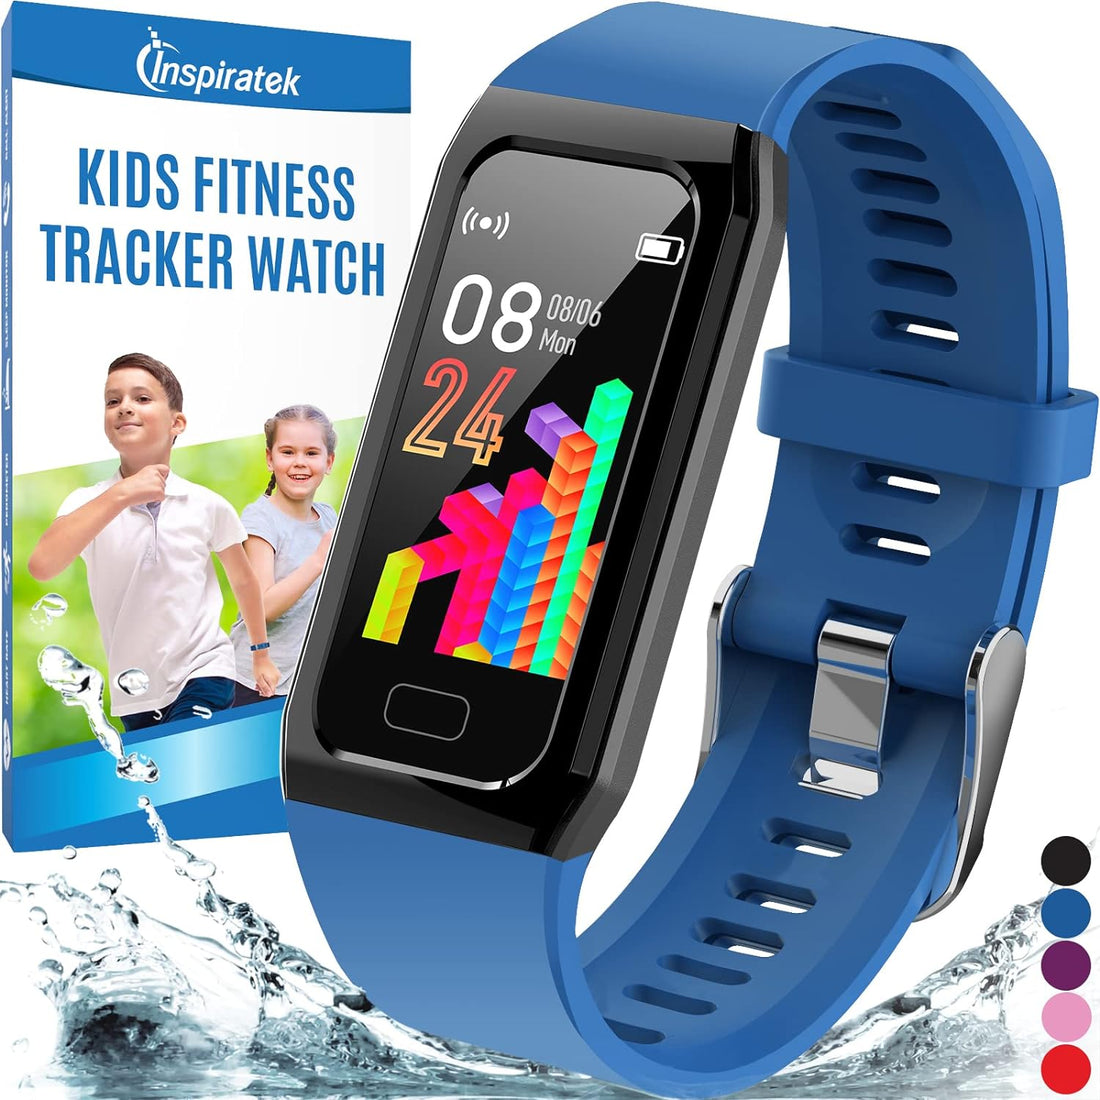 Inspiratek Kids Fitness Tracker for Girls and Boys Age 5-16 (4 Color Option)- Waterproof Fitness Watch for Kids with Heart Rate Monitor, Sleep Monitor, Calorie Counter and More - Kids Activity Tracker